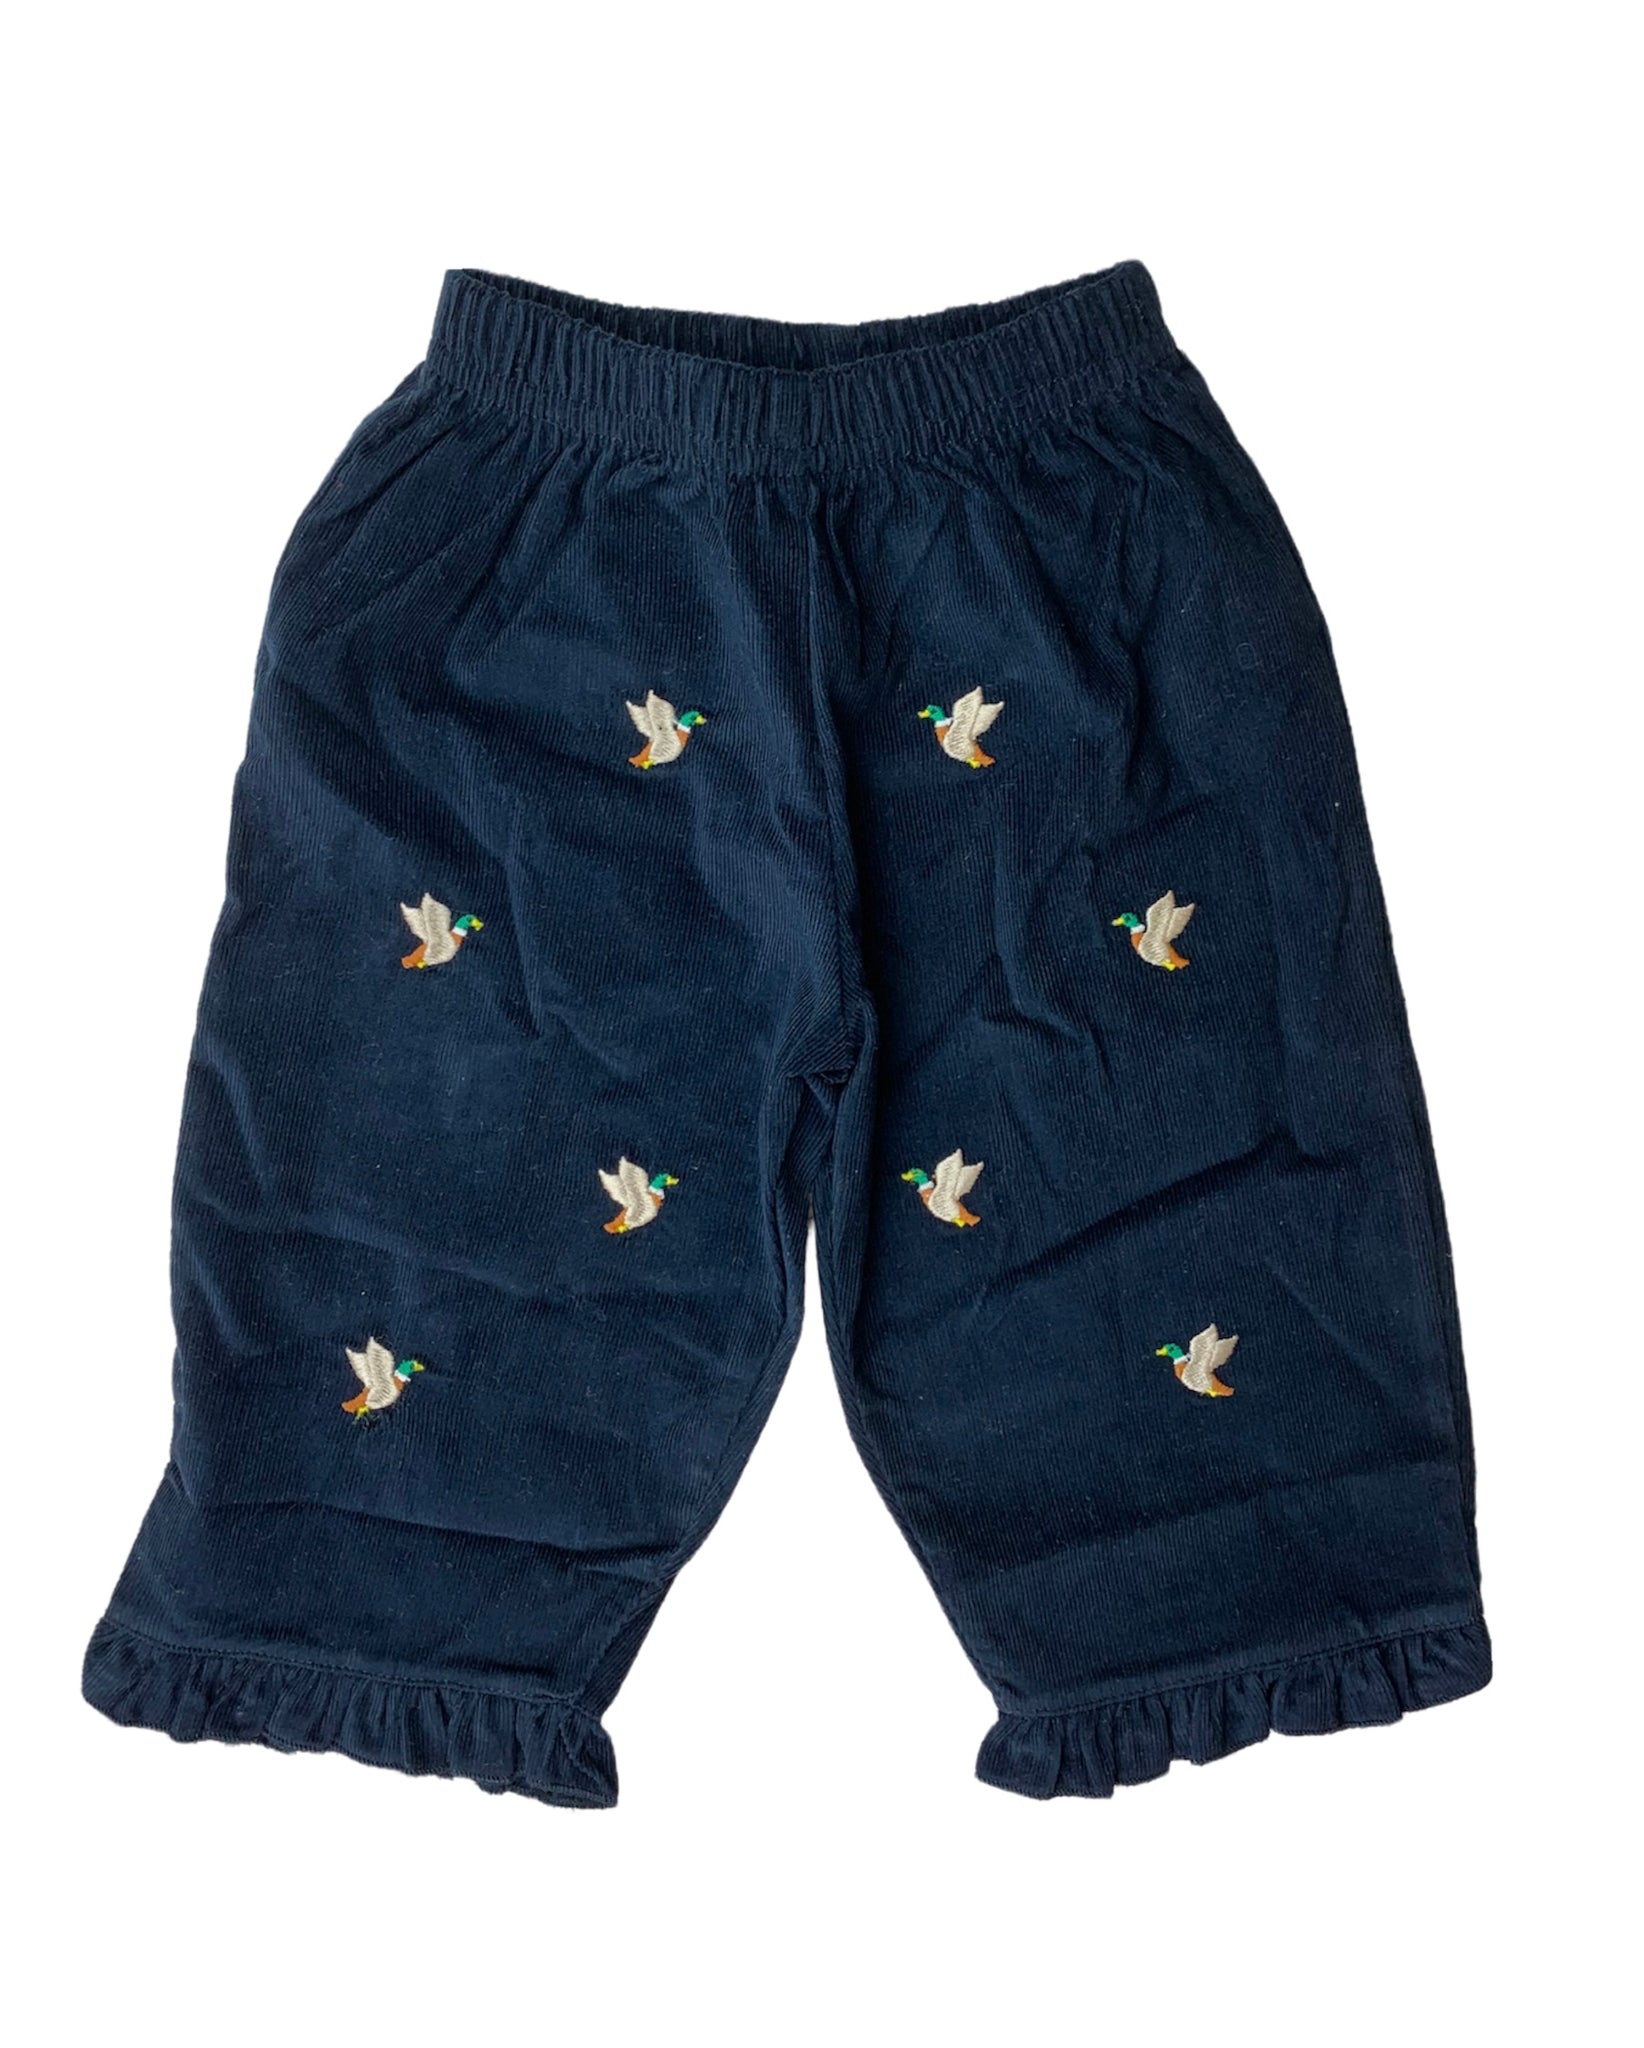 navy pants with mallard ducks embroidered all over, ruffle at ankle